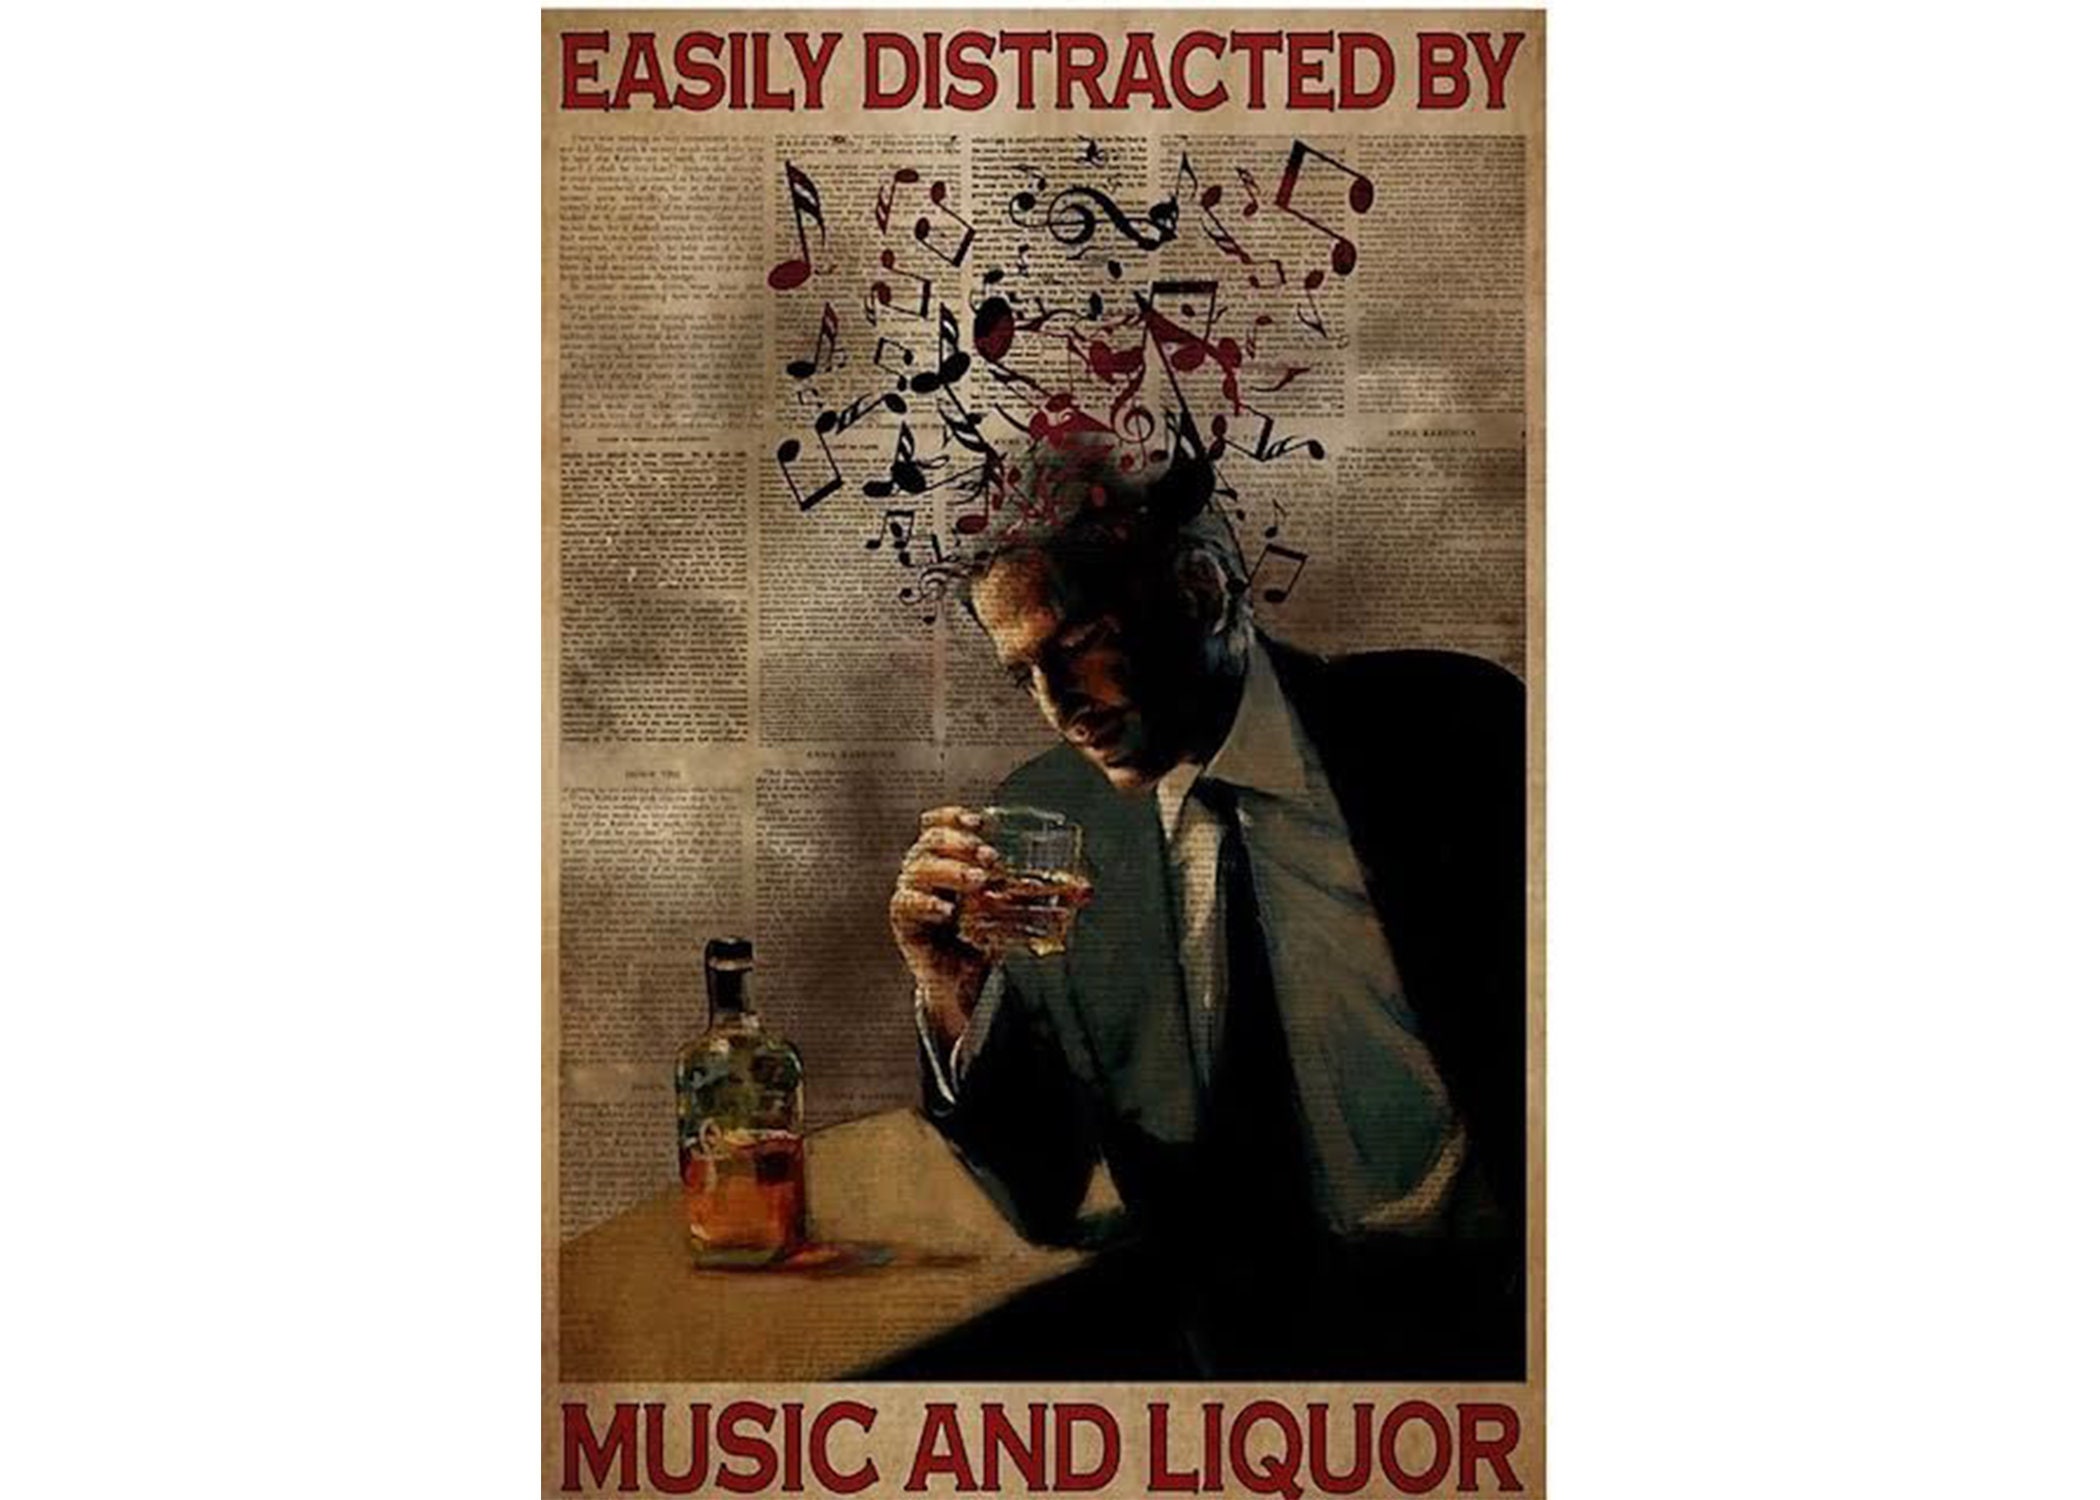 Easily Distracted By Music and Liquor Poster, Vintage Music Poster, Wall Decor, Music Gifts, Home Decor, Music Wall art, Liquor Poster